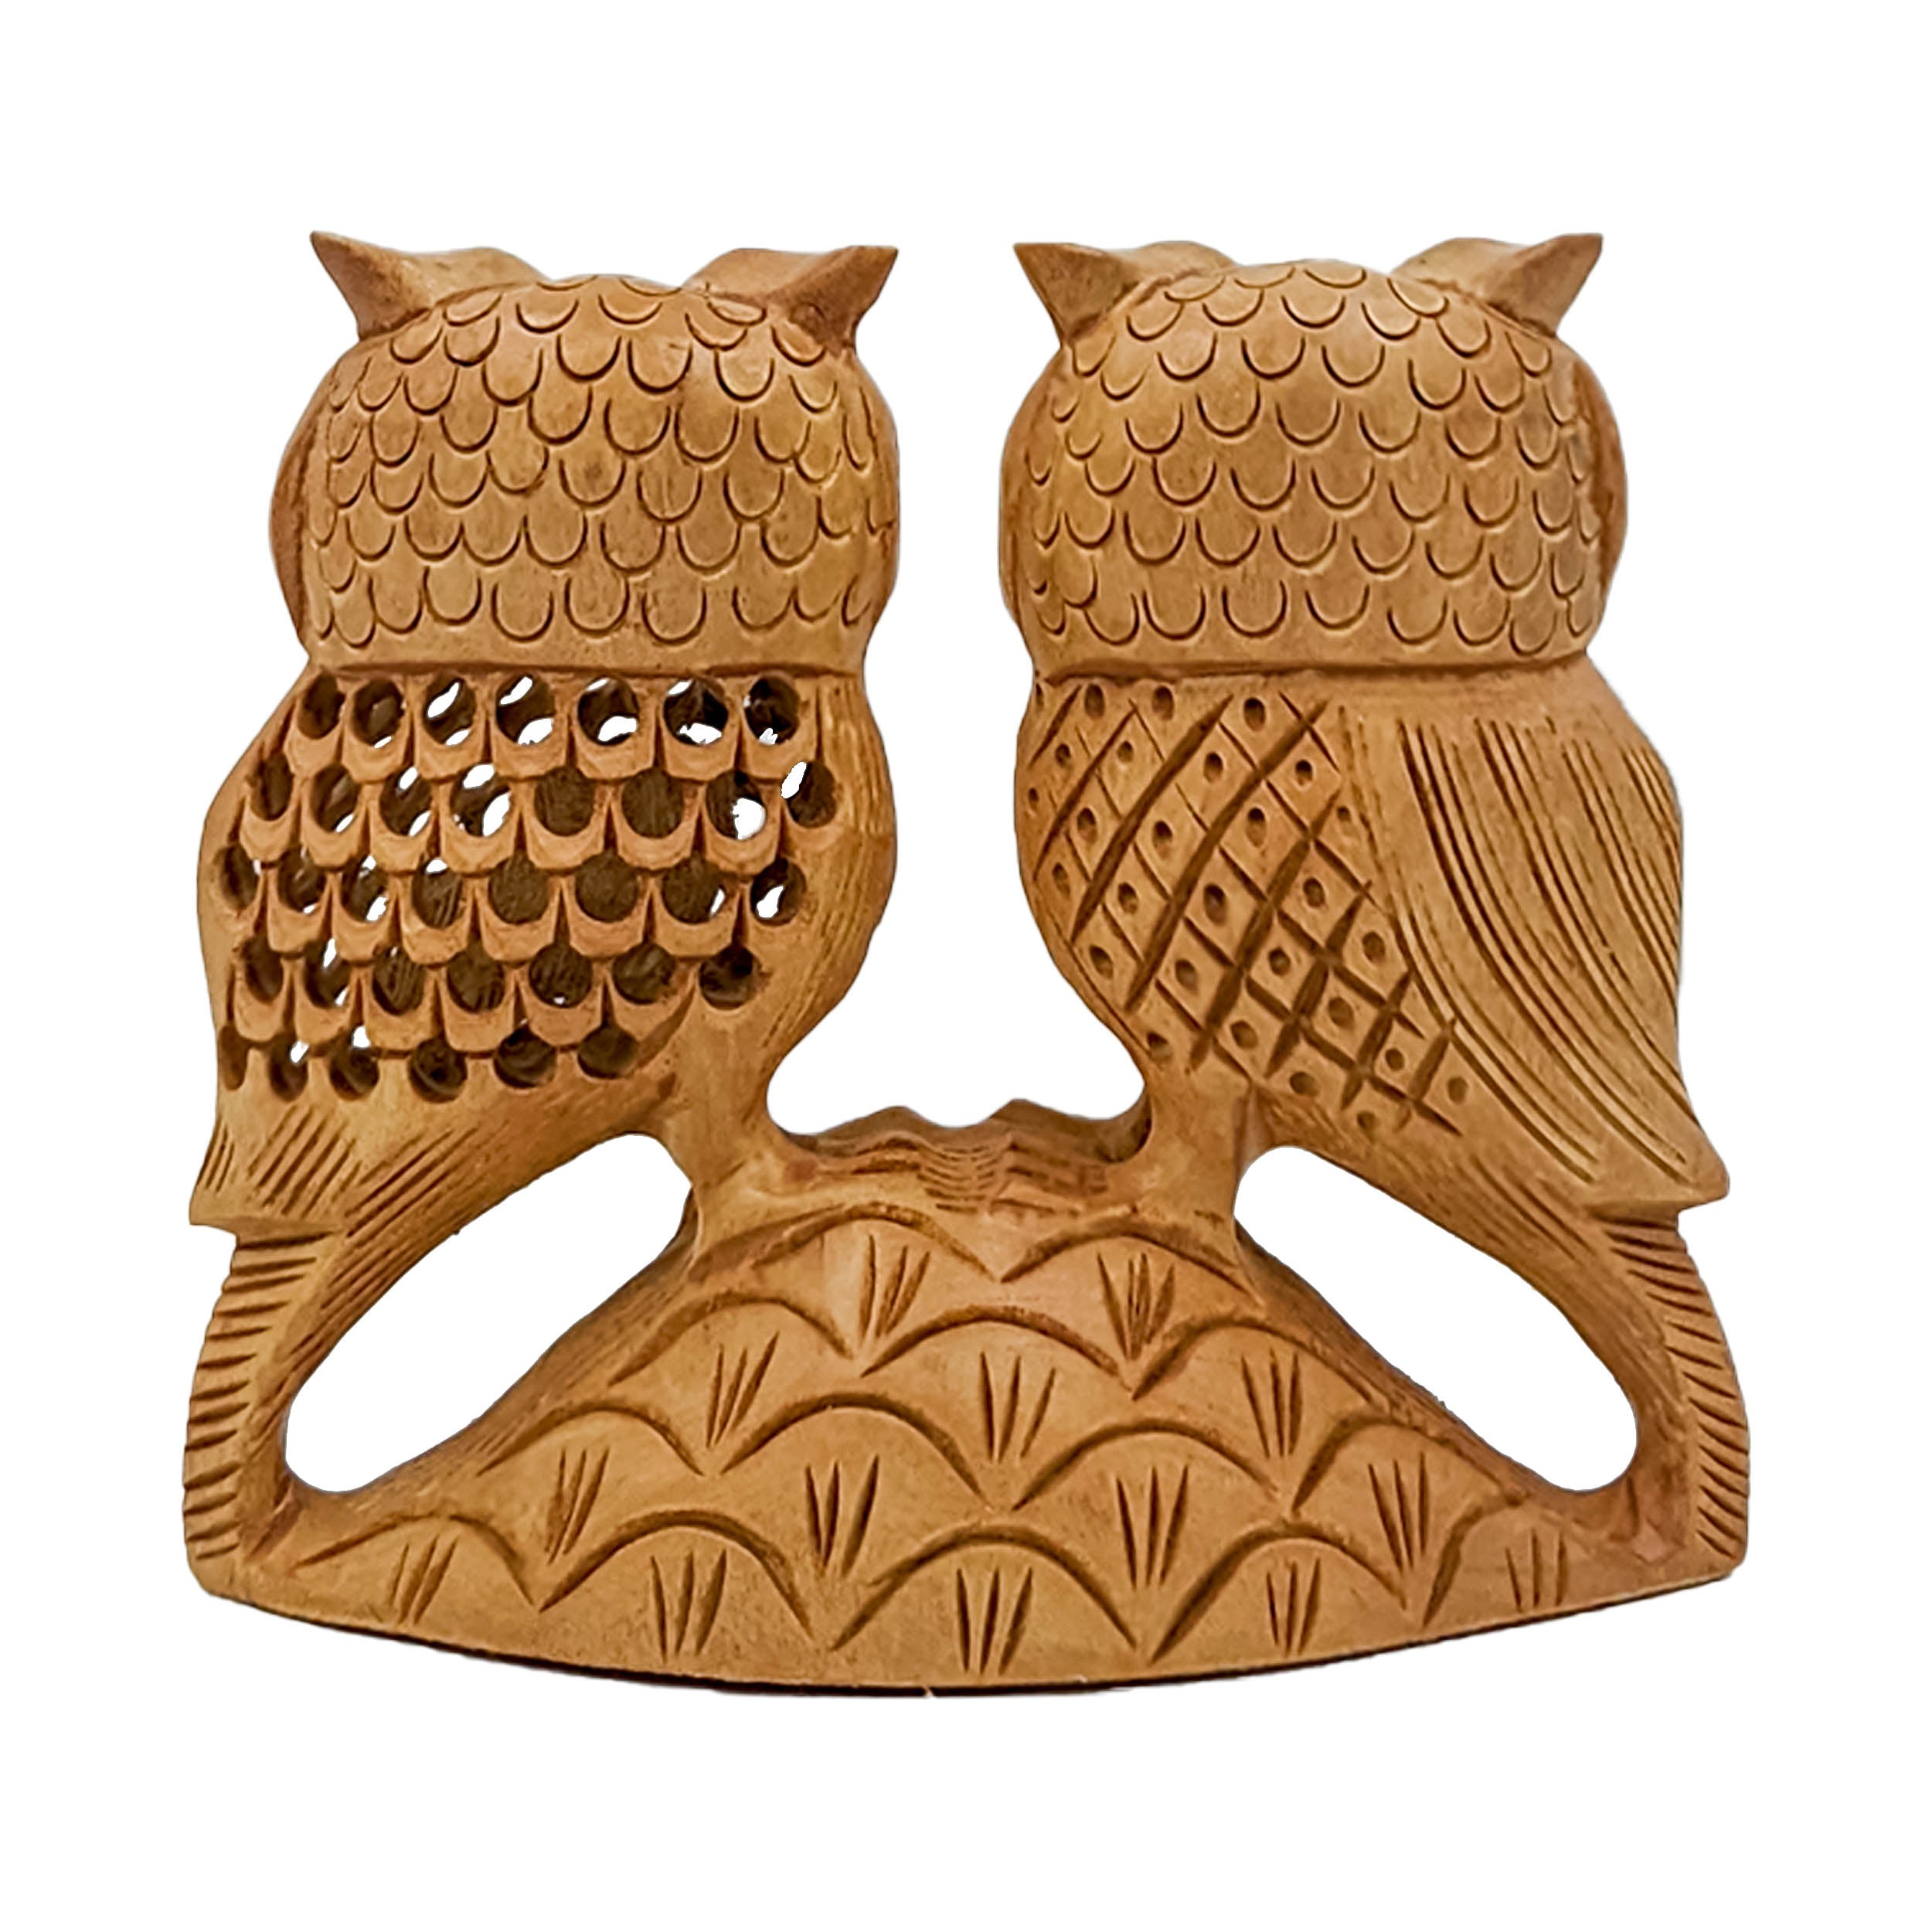 Handcrafted Wooden Couple Owl Statue 4-Inch